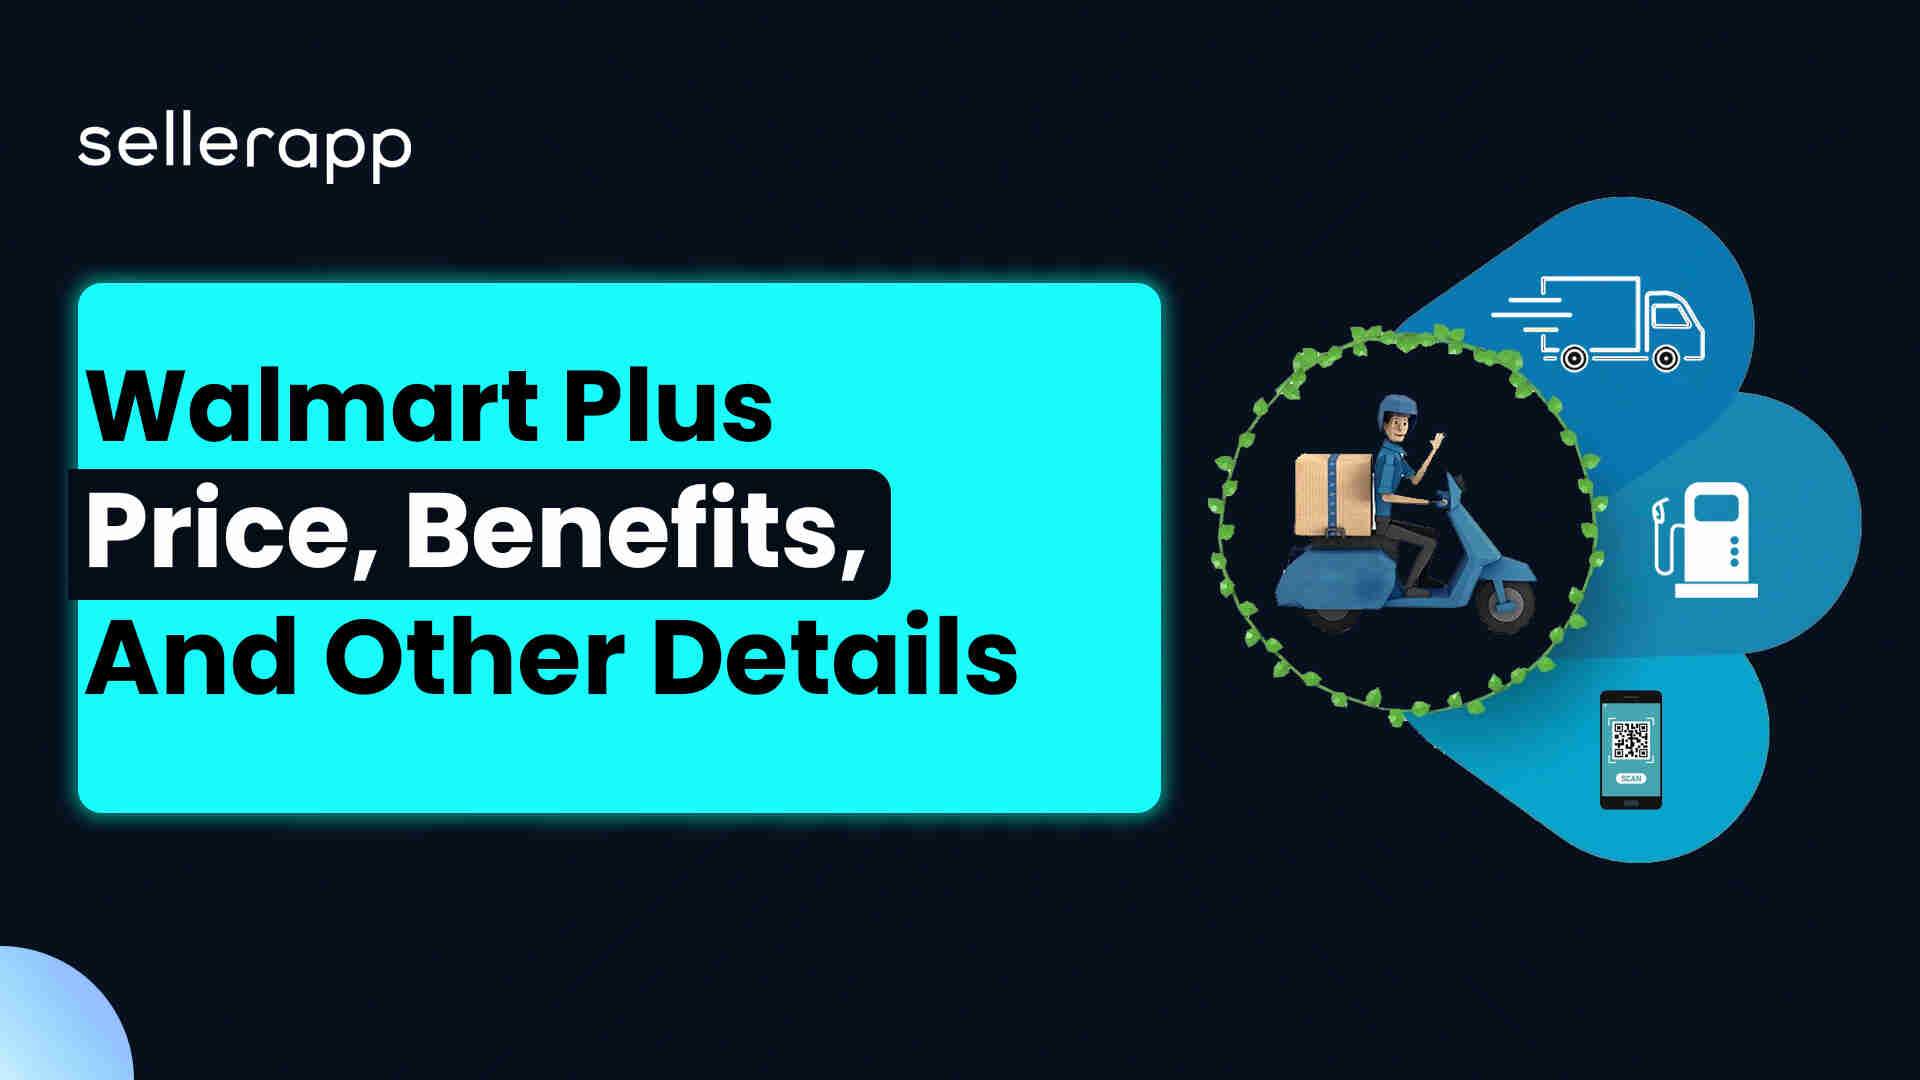 Walmart Plus Benefits and Pricing: Here’s What You Should Know